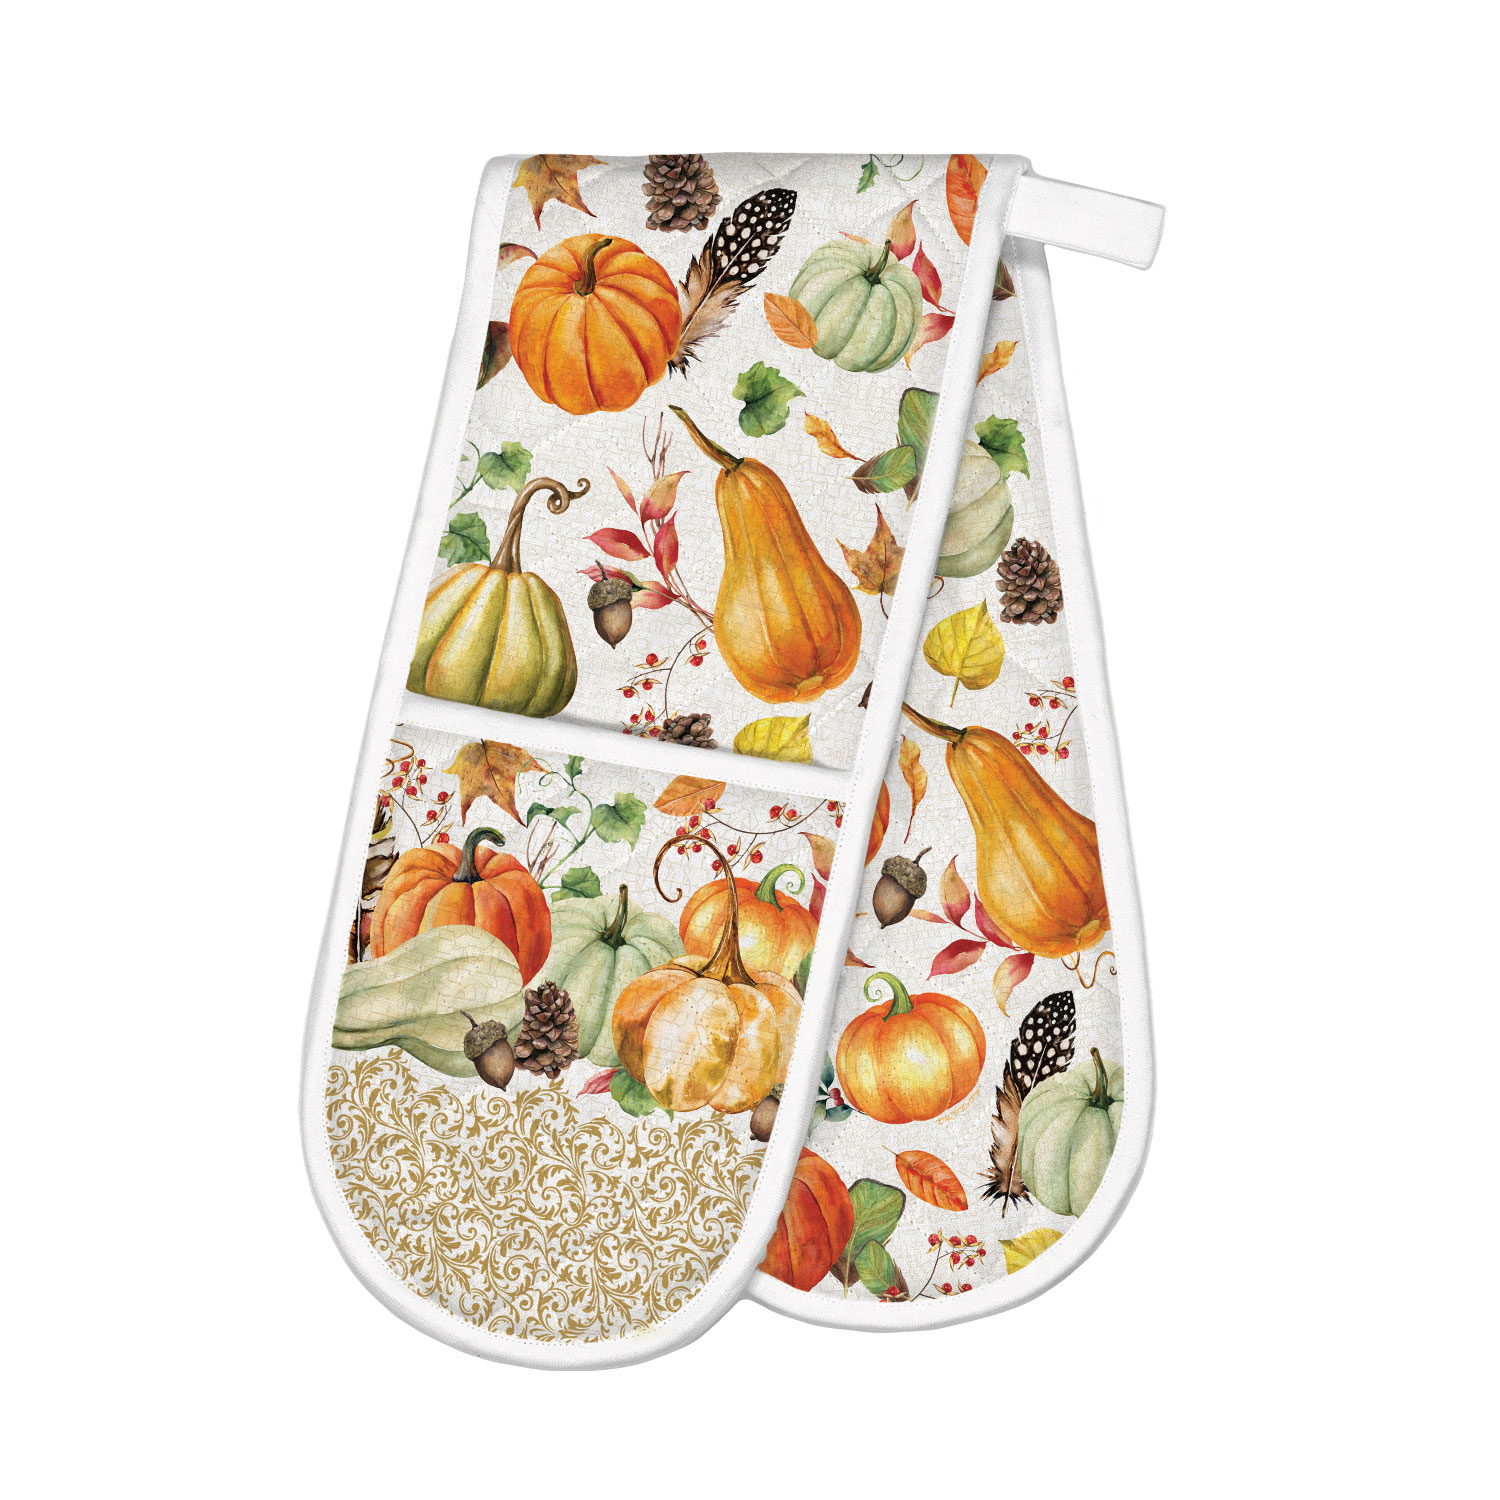 Tranquility Michel Design Works Padded Cotton Oven Mitt